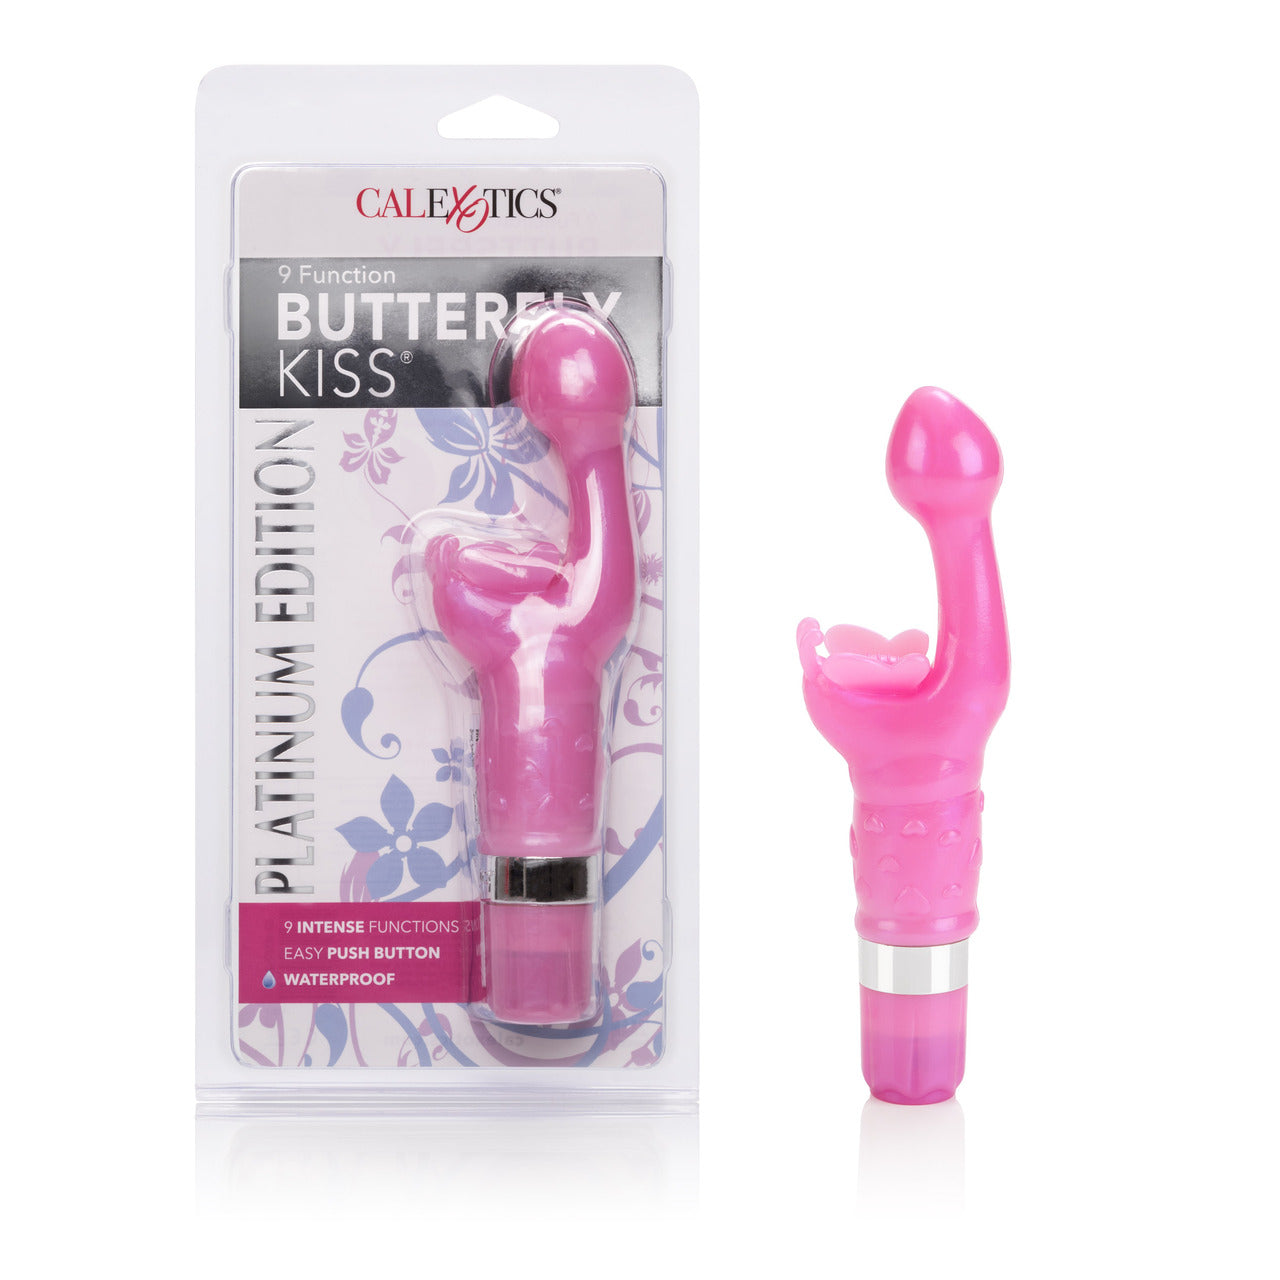 9-Function Butterfly Kiss Platinum Edition - Thorn & Feather Sex Toy Canada